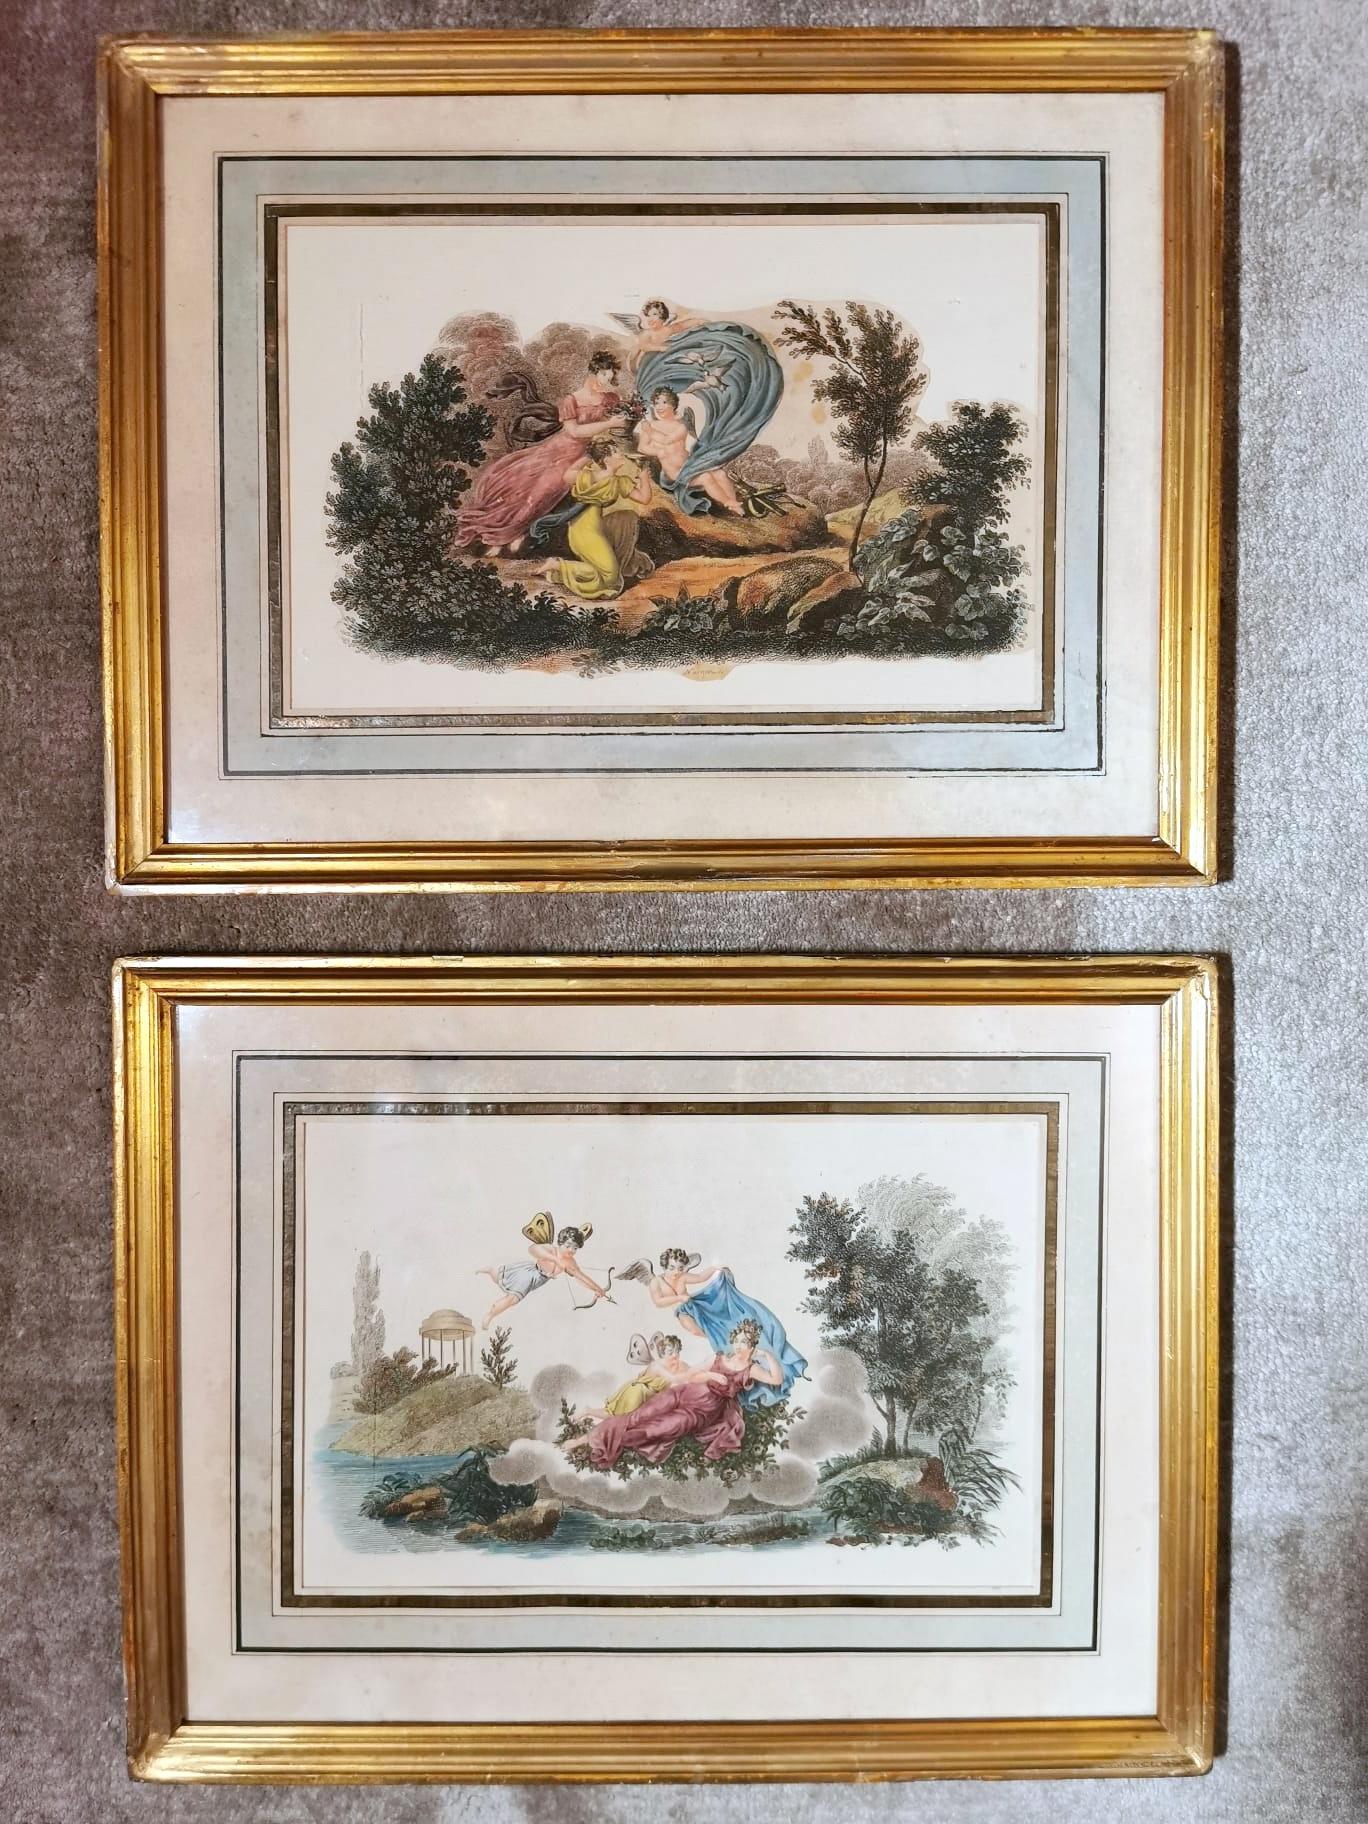 We kindly suggest you read the whole description, because with it we try to give you detailed technical and historical information to guarantee the authenticity of our objects.
Pair of prints engraved by burin and painted in watercolor; both are a